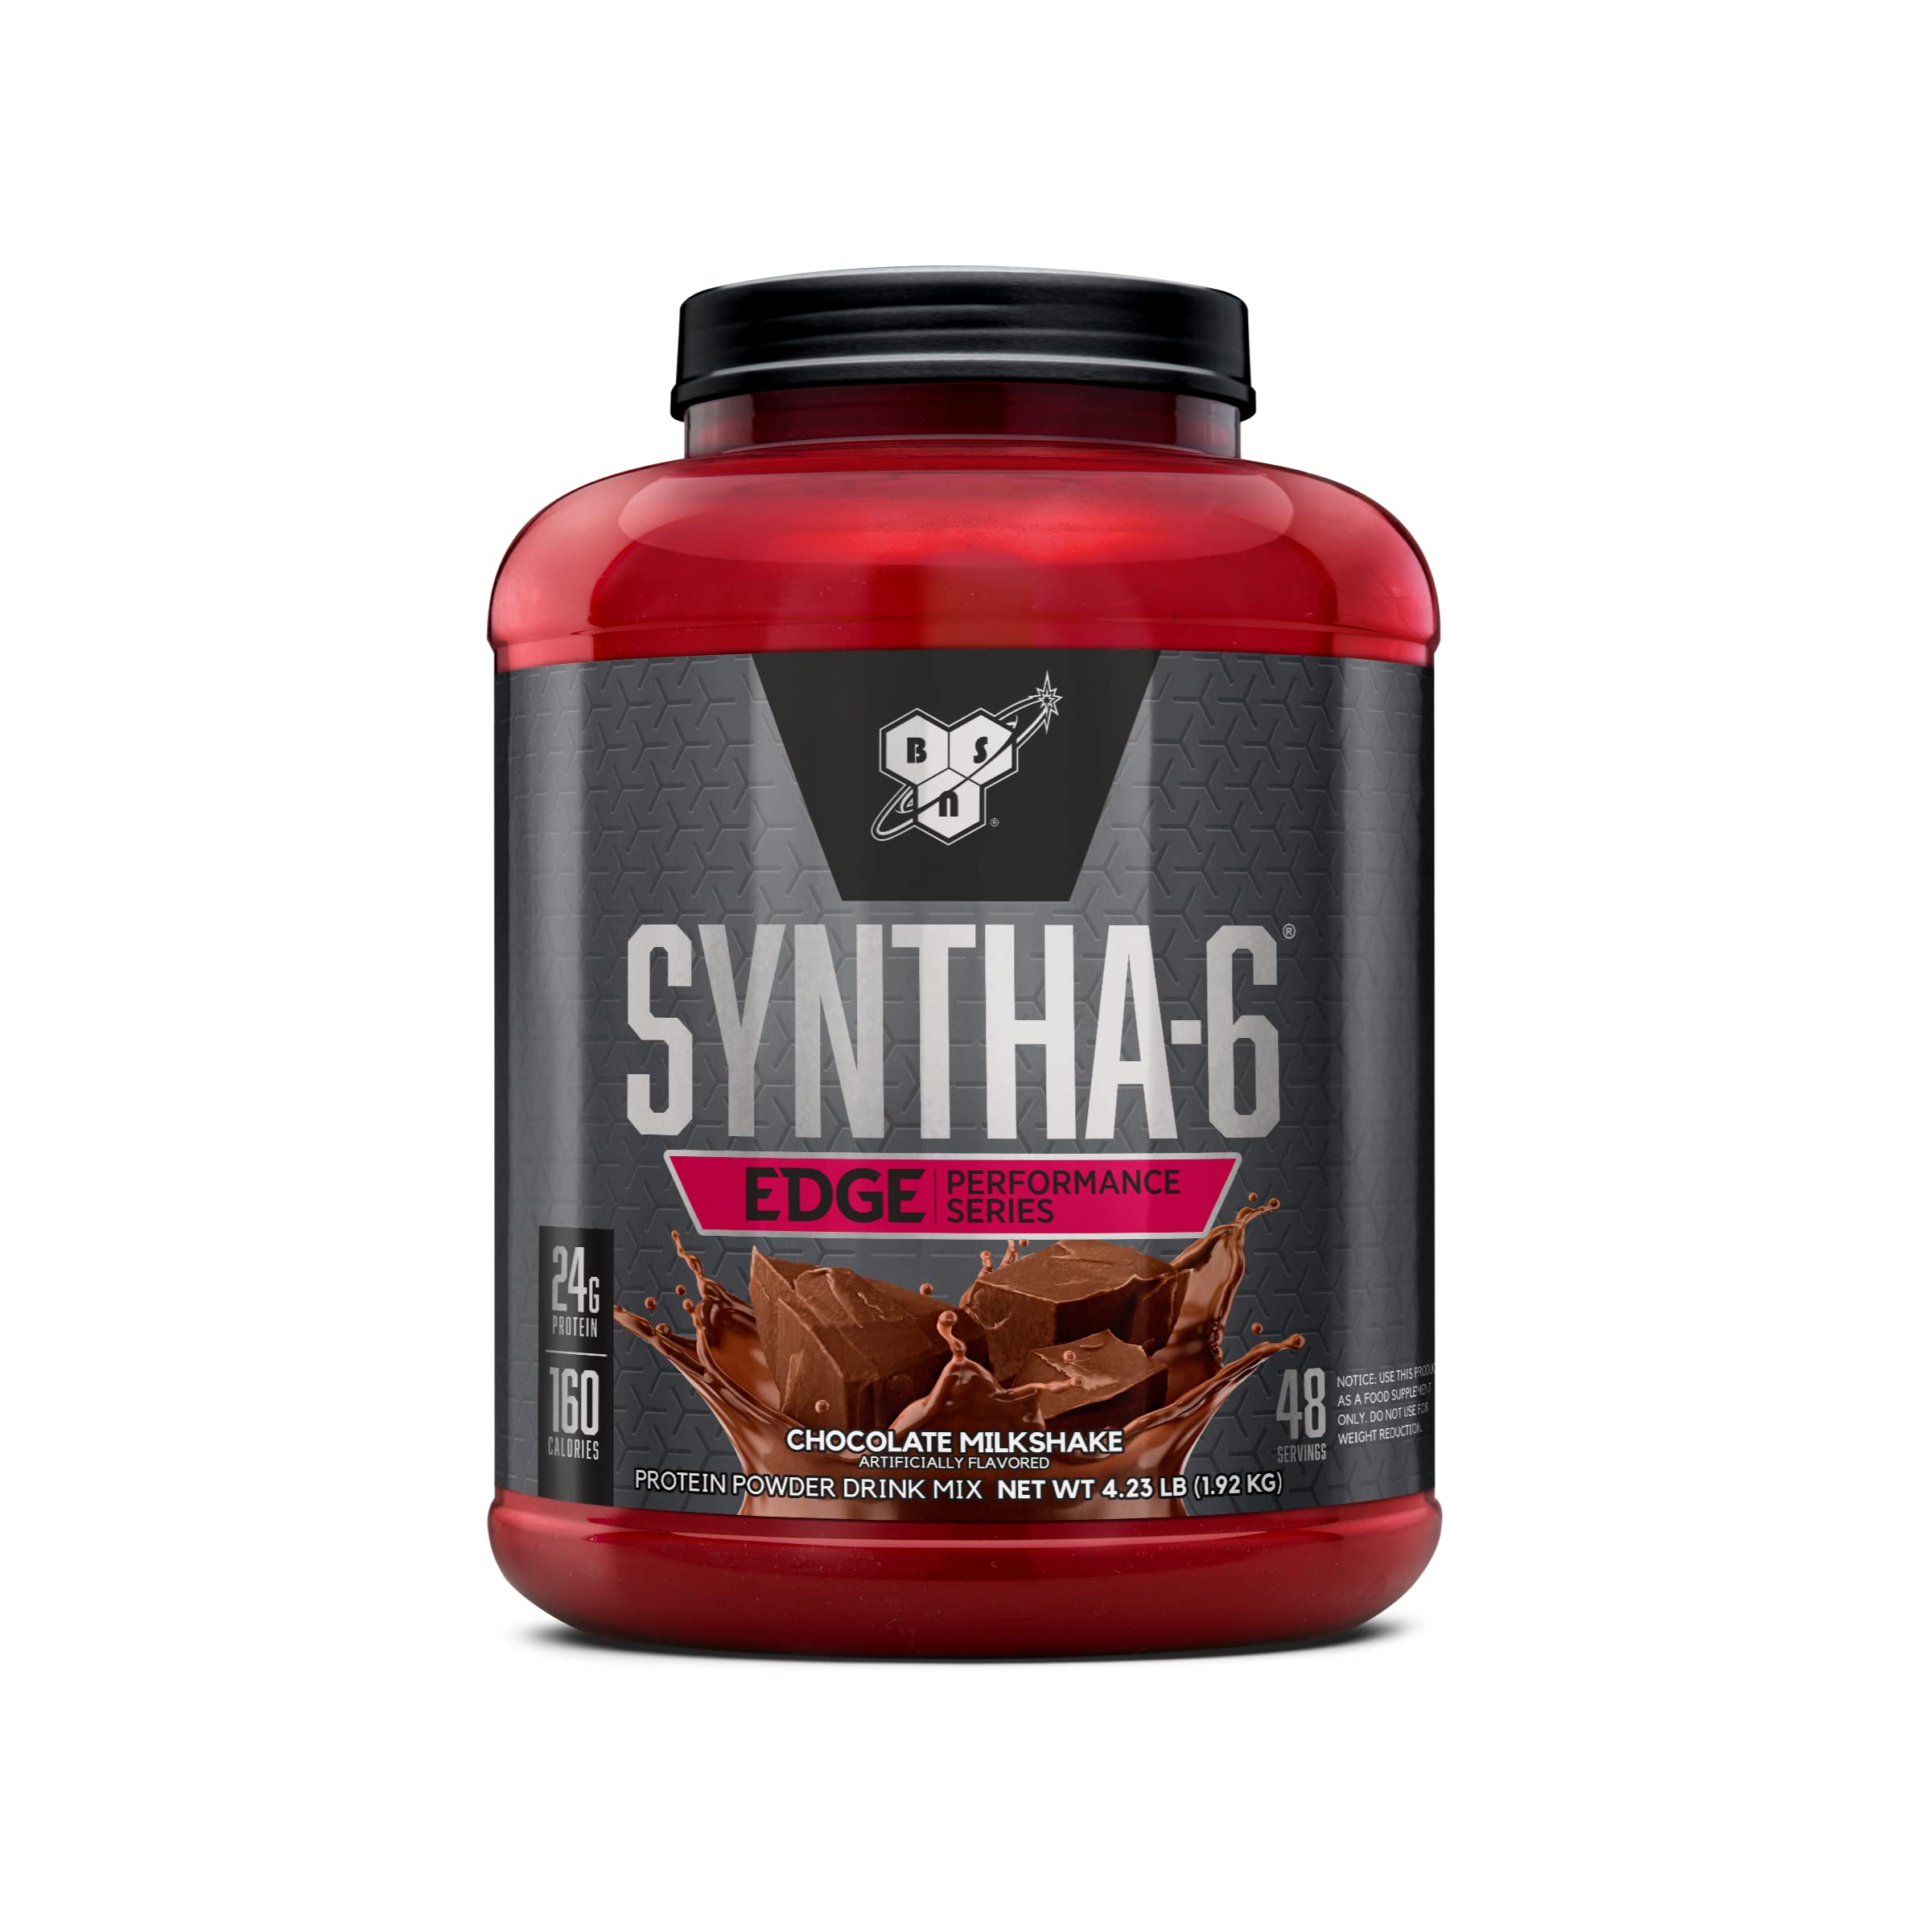 Book Cover BSN SYNTHA-6 Edge Protein Powder, Chocolate Protein Powder with Hydrolyzed Whey, Micellar Casein, Milk Protein Isolate, Low Sugar, 24g Protein, Chocolate Milkshake, 48 Servings Chocolate Milkshake 48.0 Servings (Pack of 1)